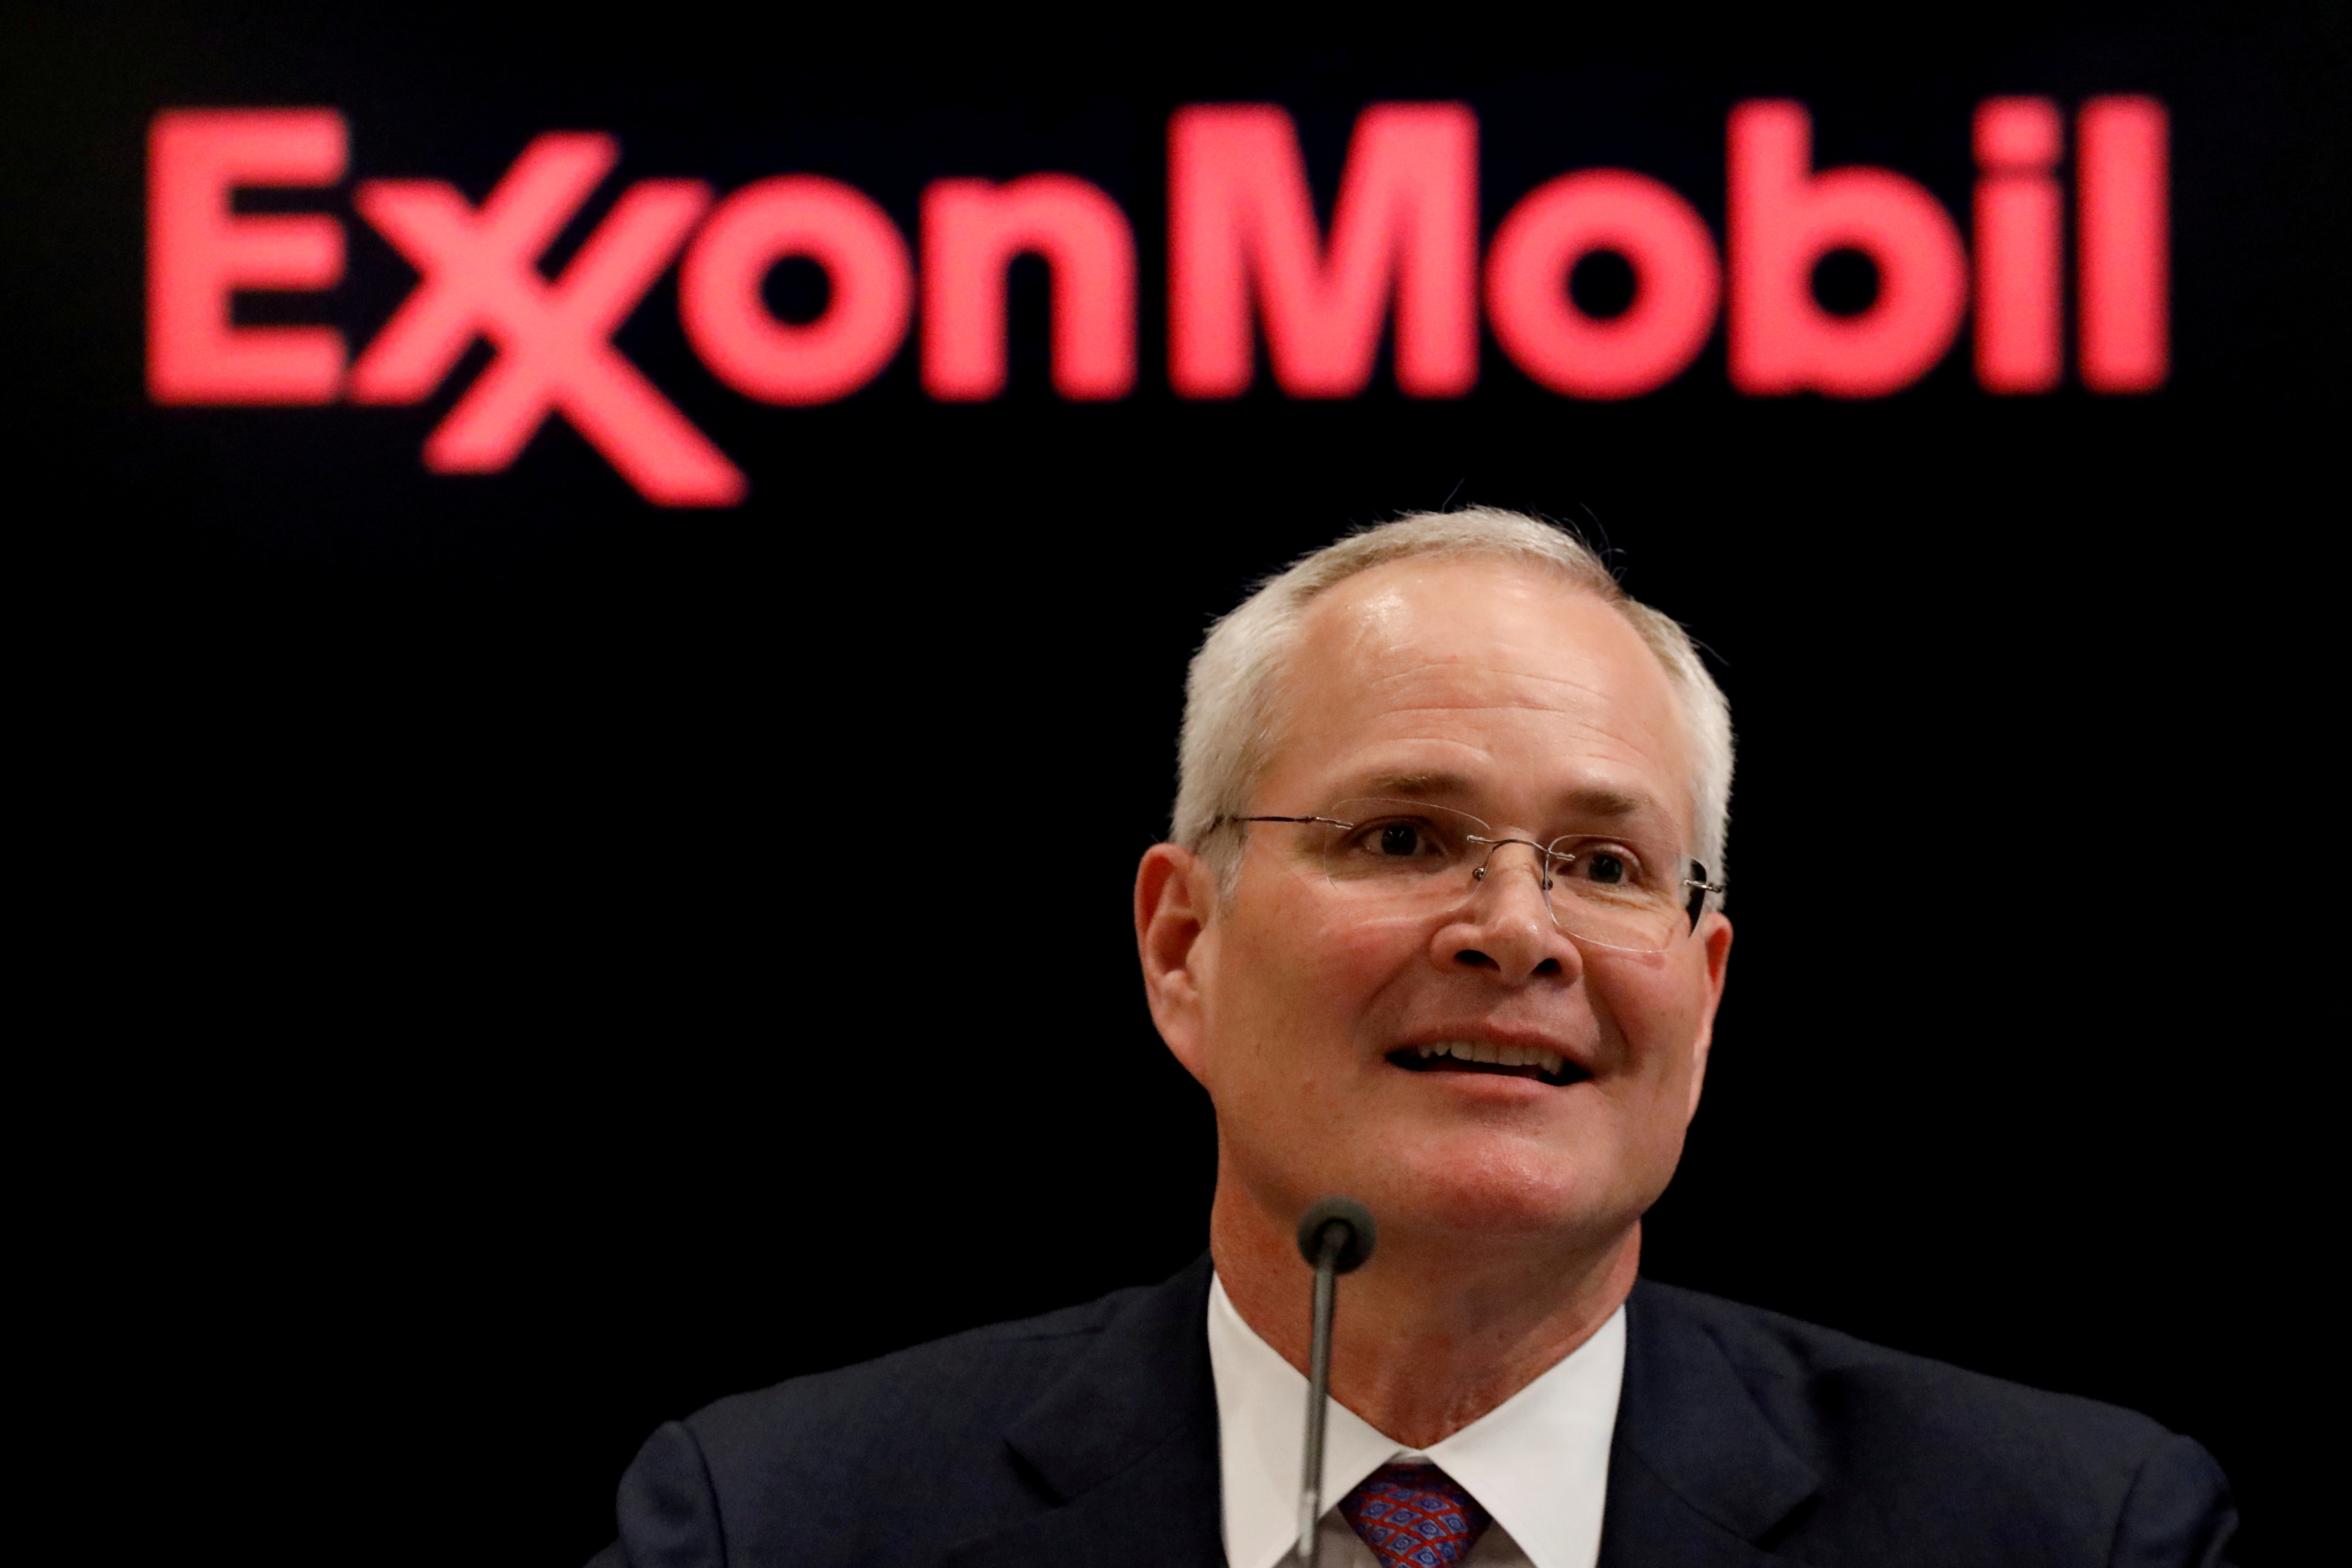 Darren Woods, Chairman & CEO, Exxon Mobil Corporation speaks during a news conference at the NYSE